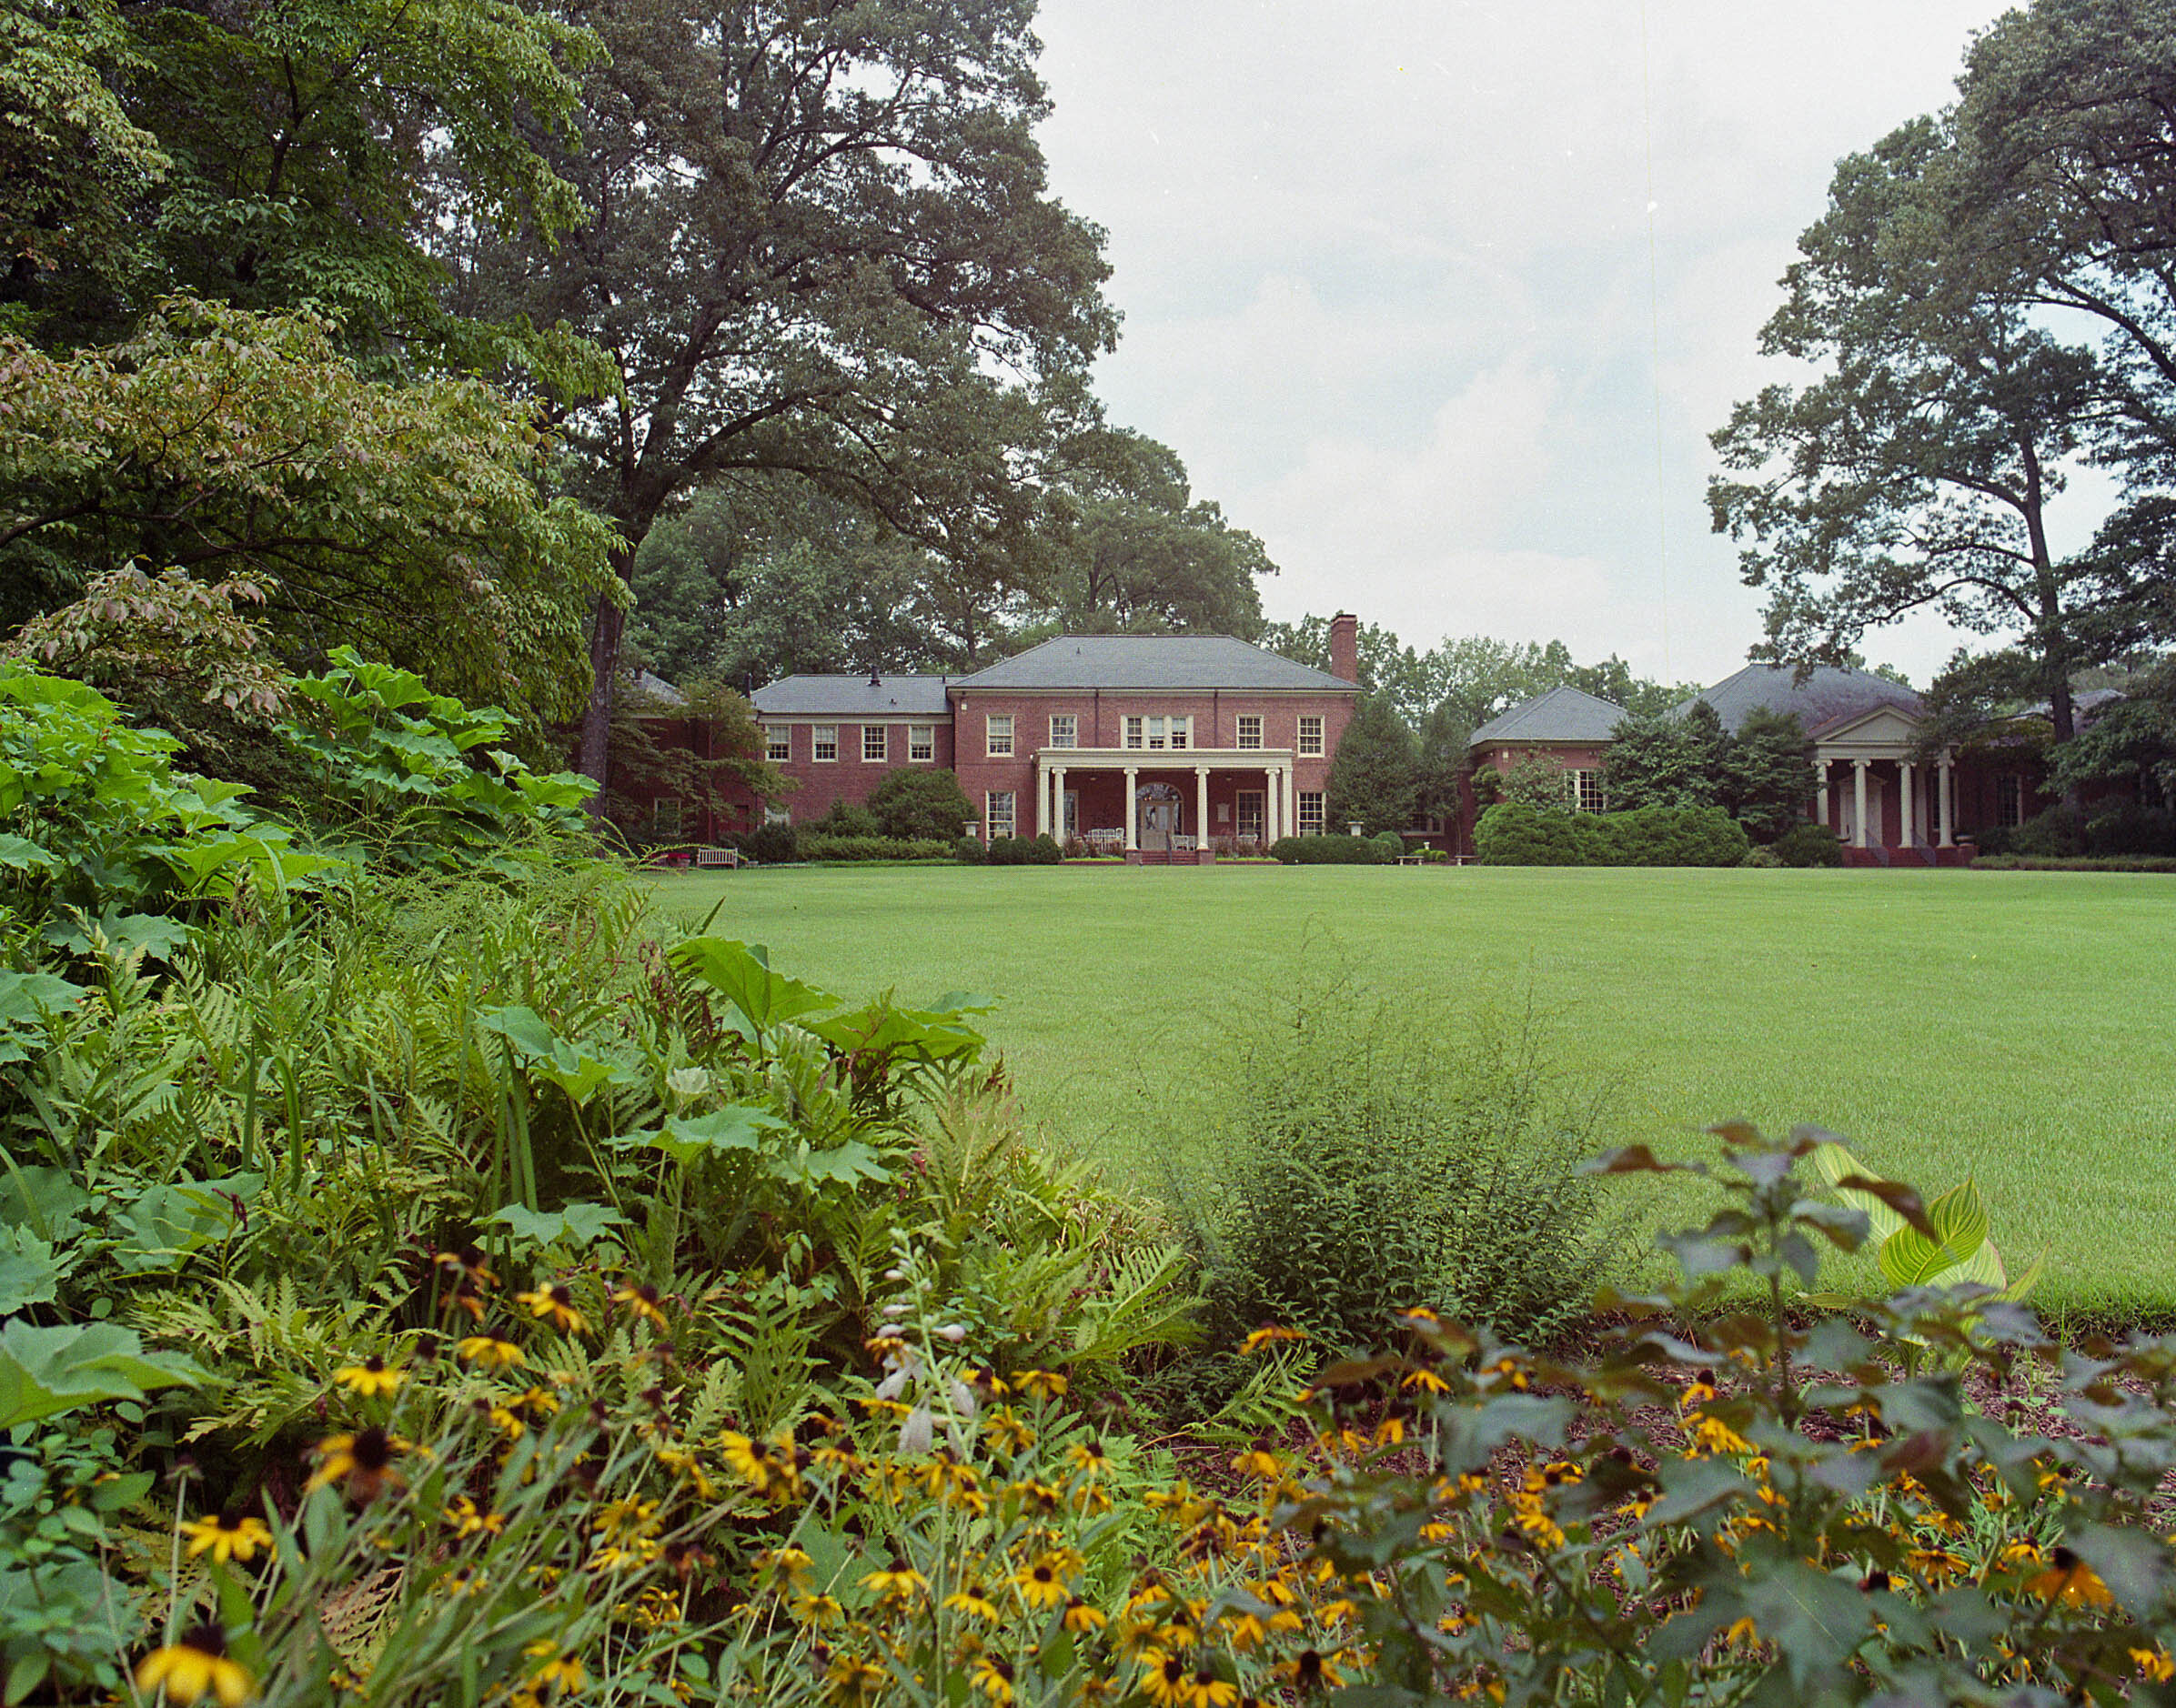 The Dixon Mansion and main lawn.